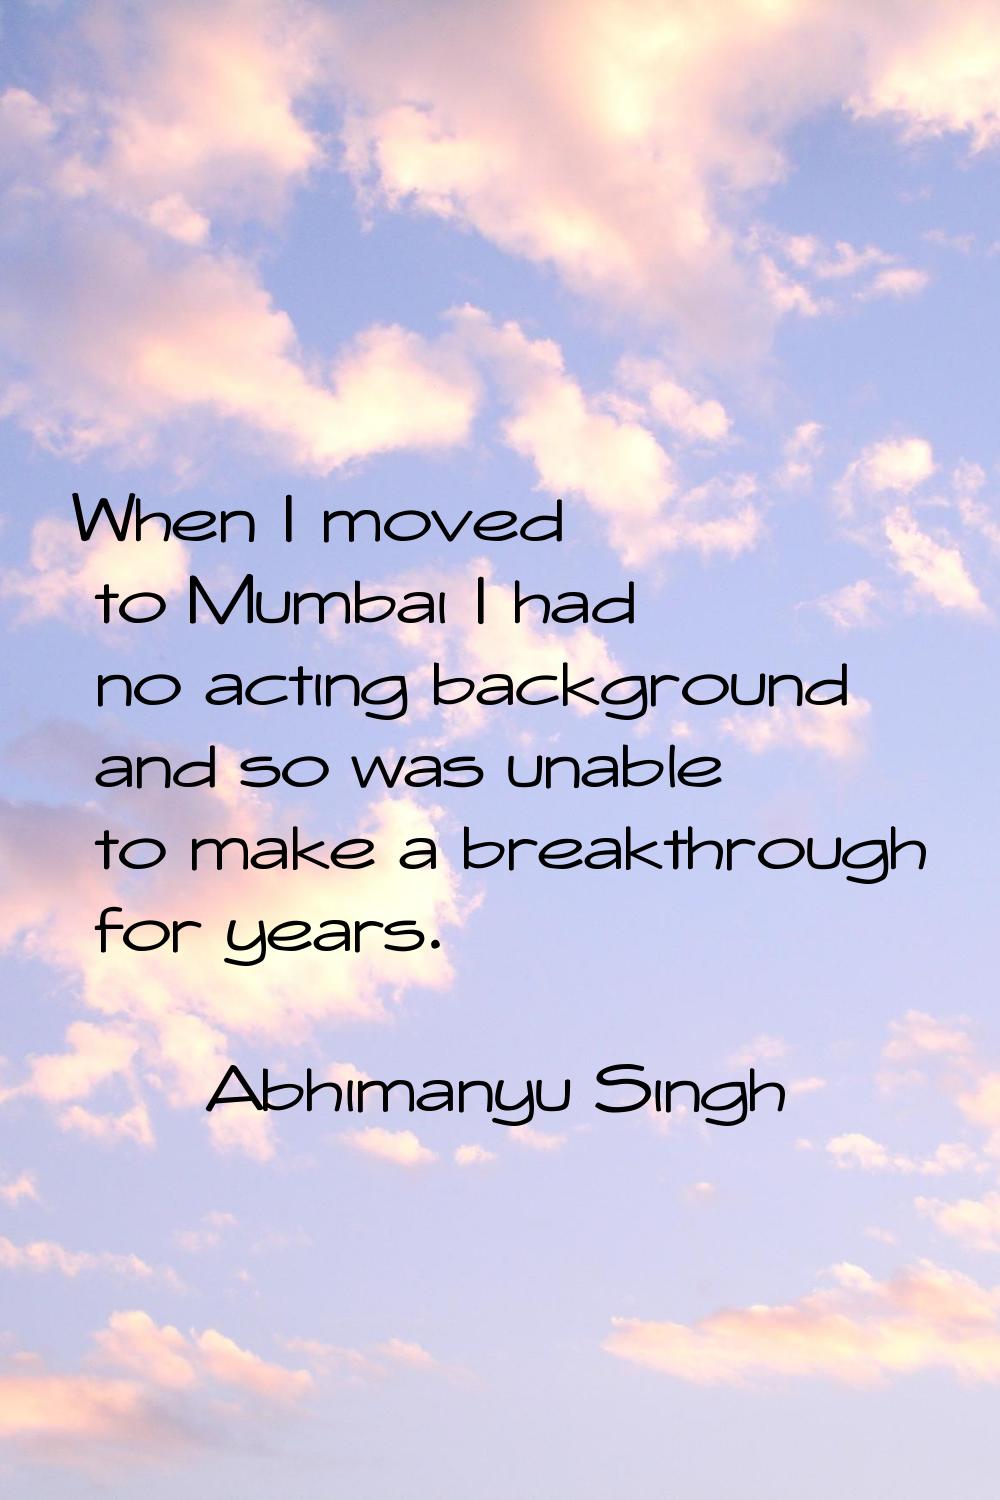 When I moved to Mumbai I had no acting background and so was unable to make a breakthrough for year